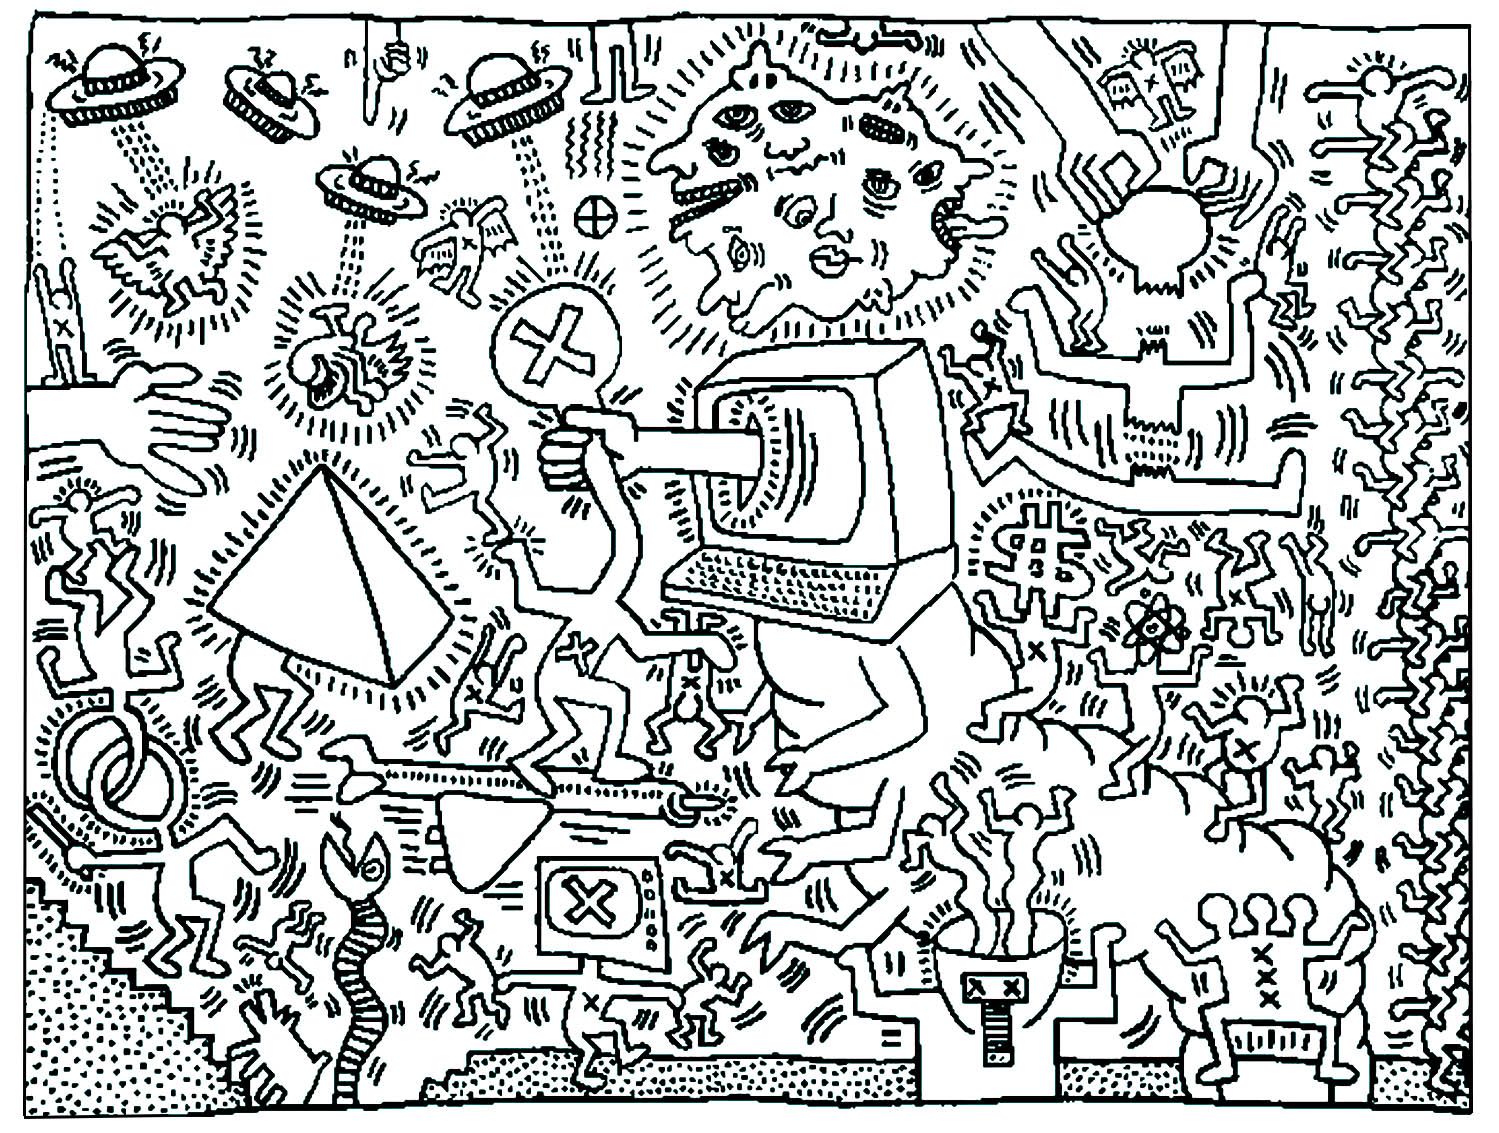 Coloring page created from a keith haring painting keith haring pop art coloring pages keith haring art